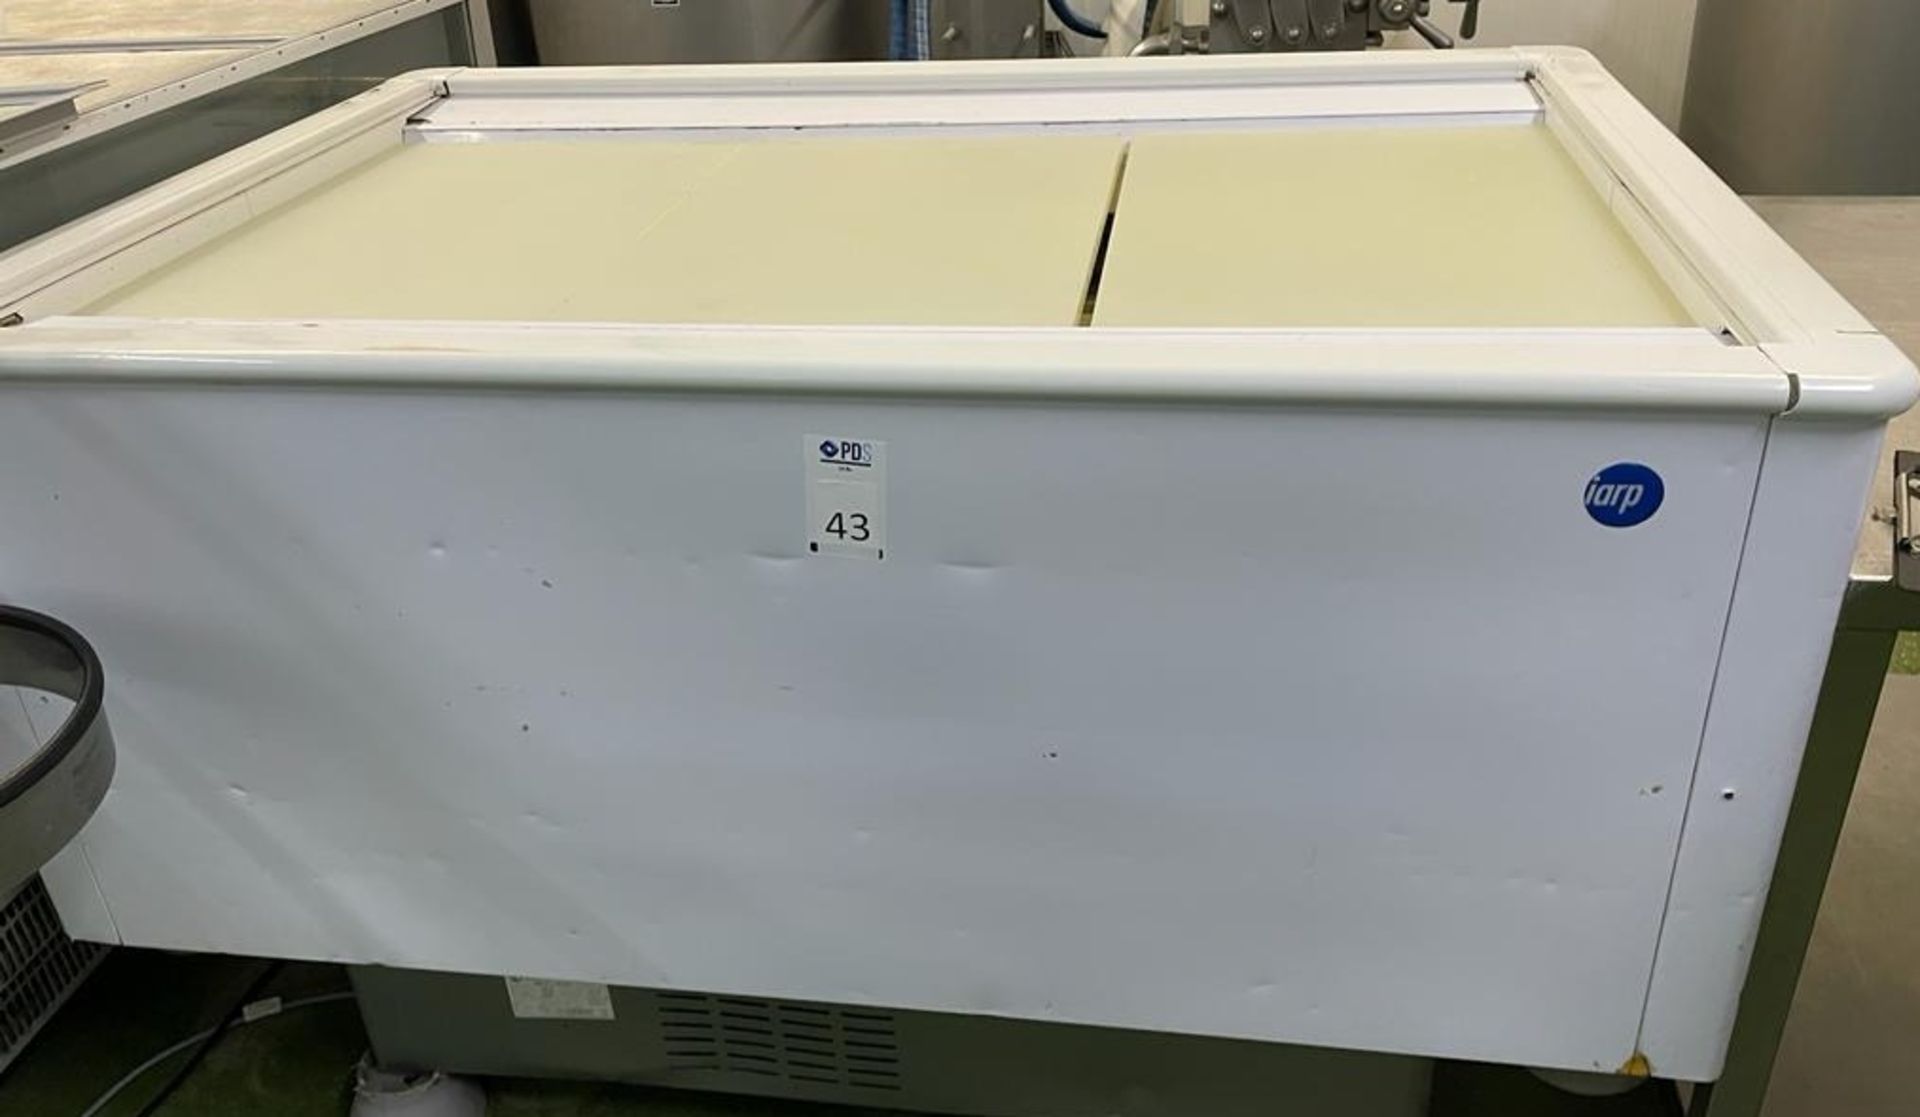 Iarp Chest Freezer (Location: NW London. Please Refer to General Notes)